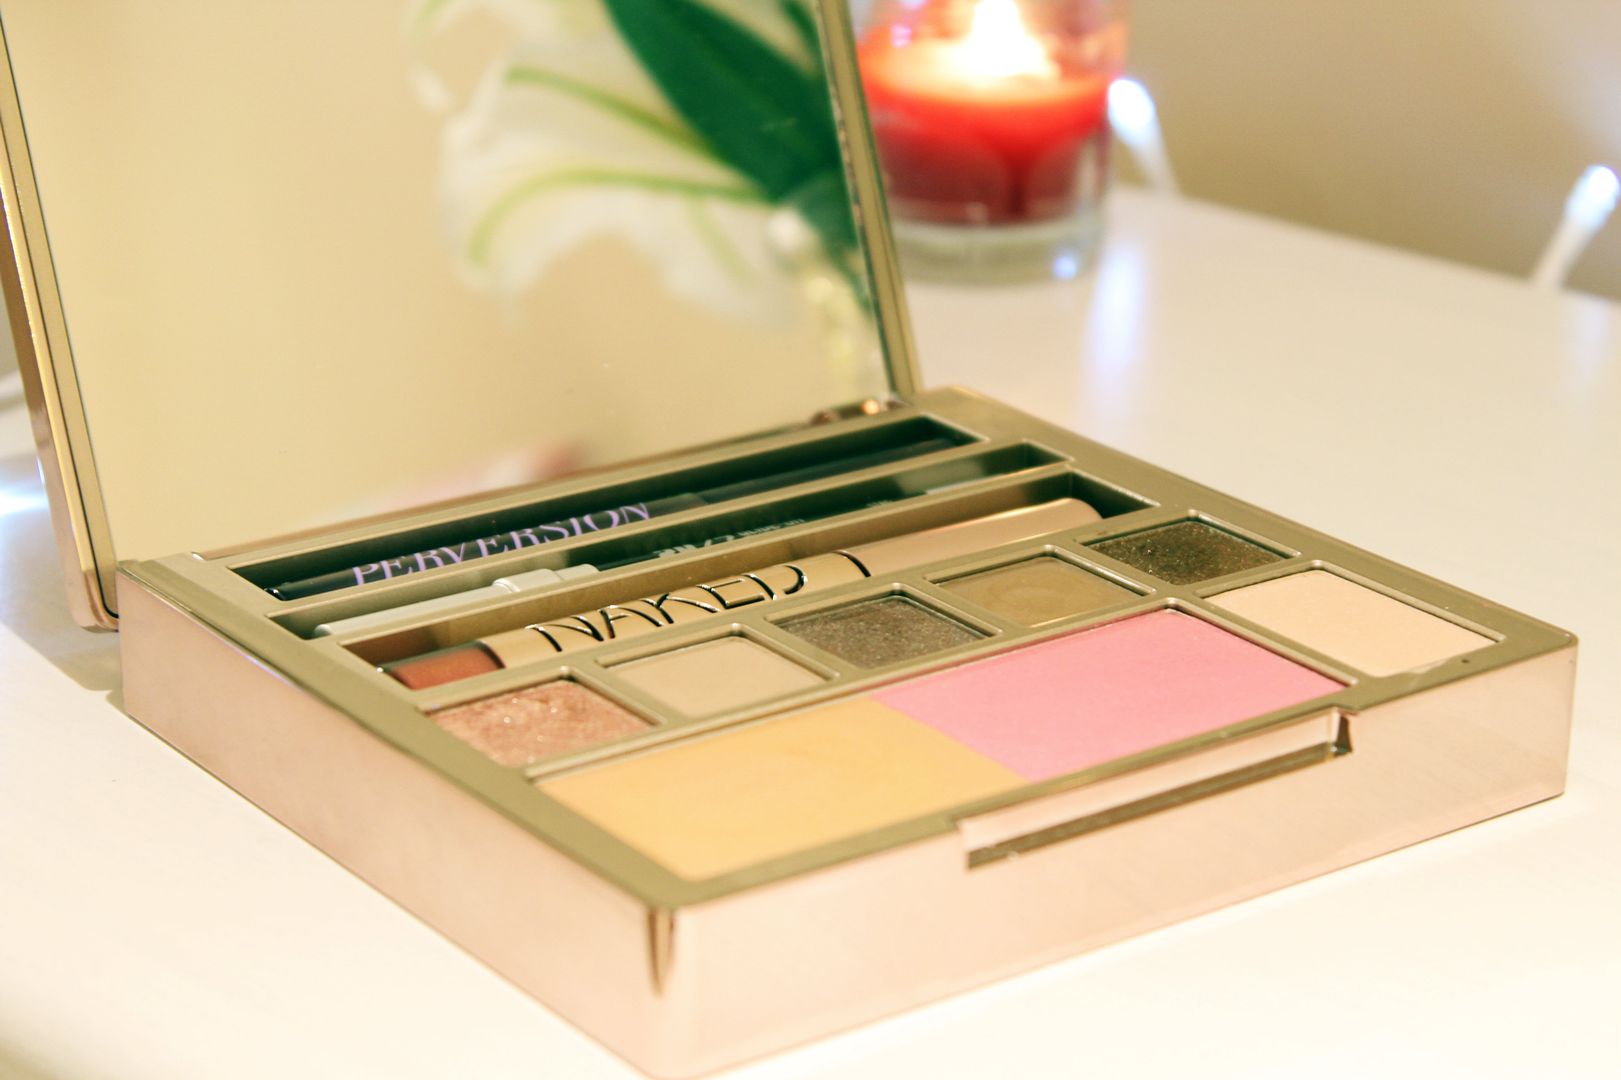 Urban Decay Naked On The Run Palette Review Inside The Palette Belle-Amie Beauty Fashion Lifestyle Blog